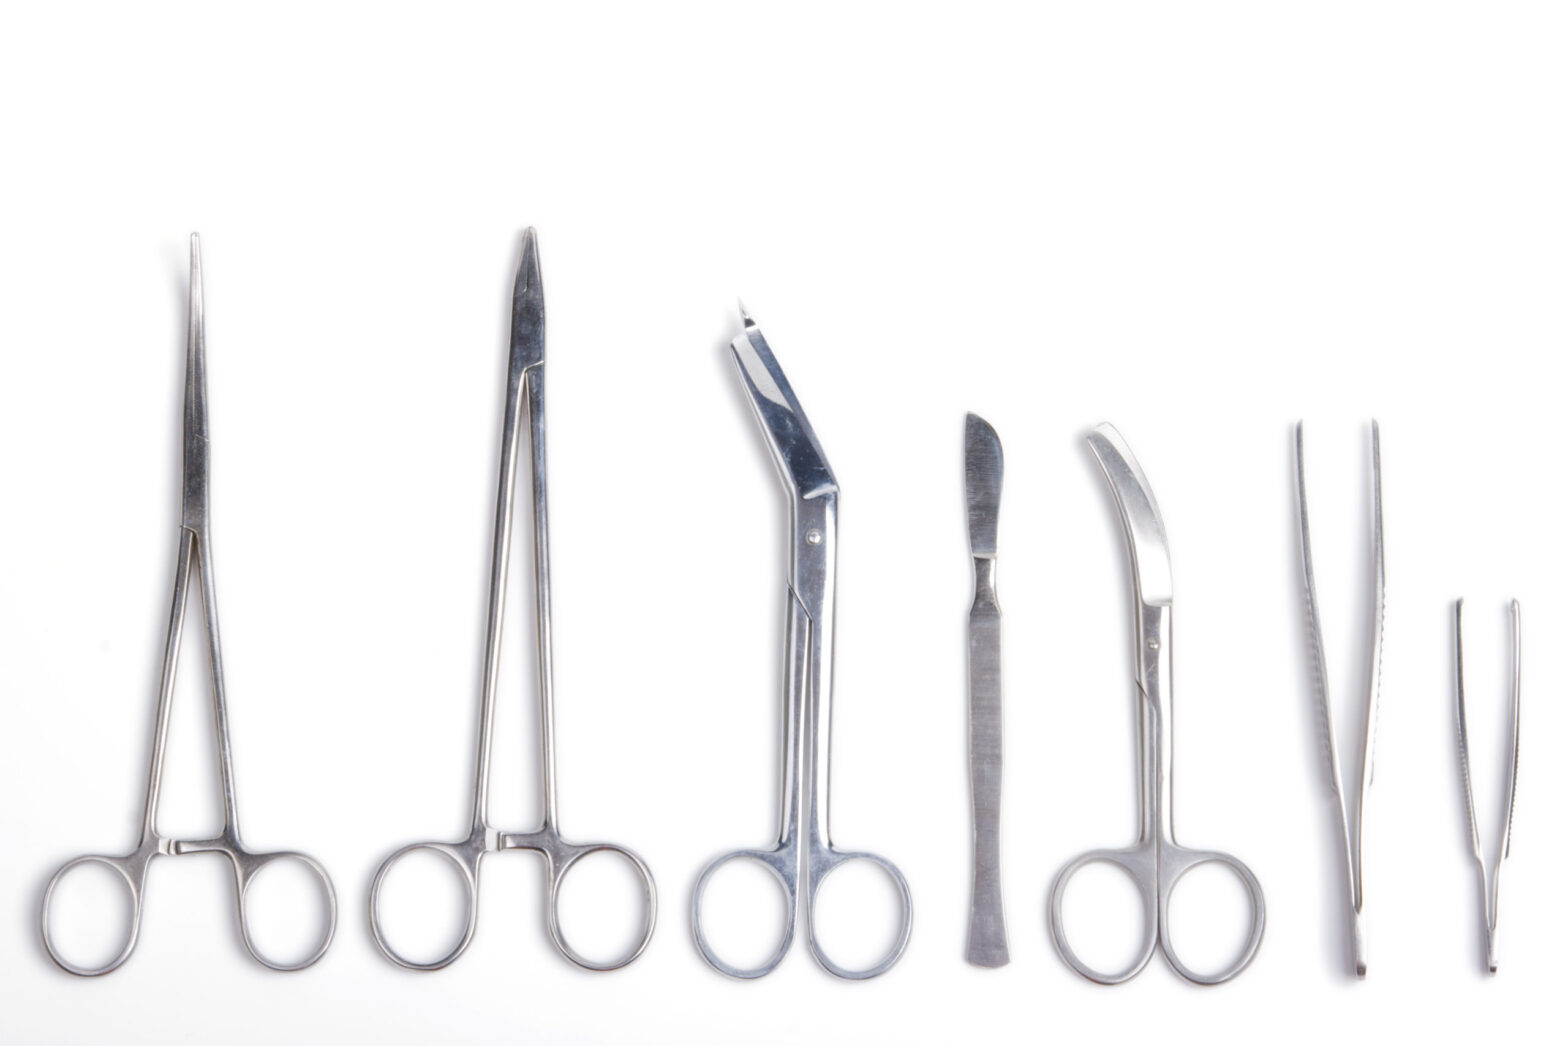 Global Surgical Scissors Industry